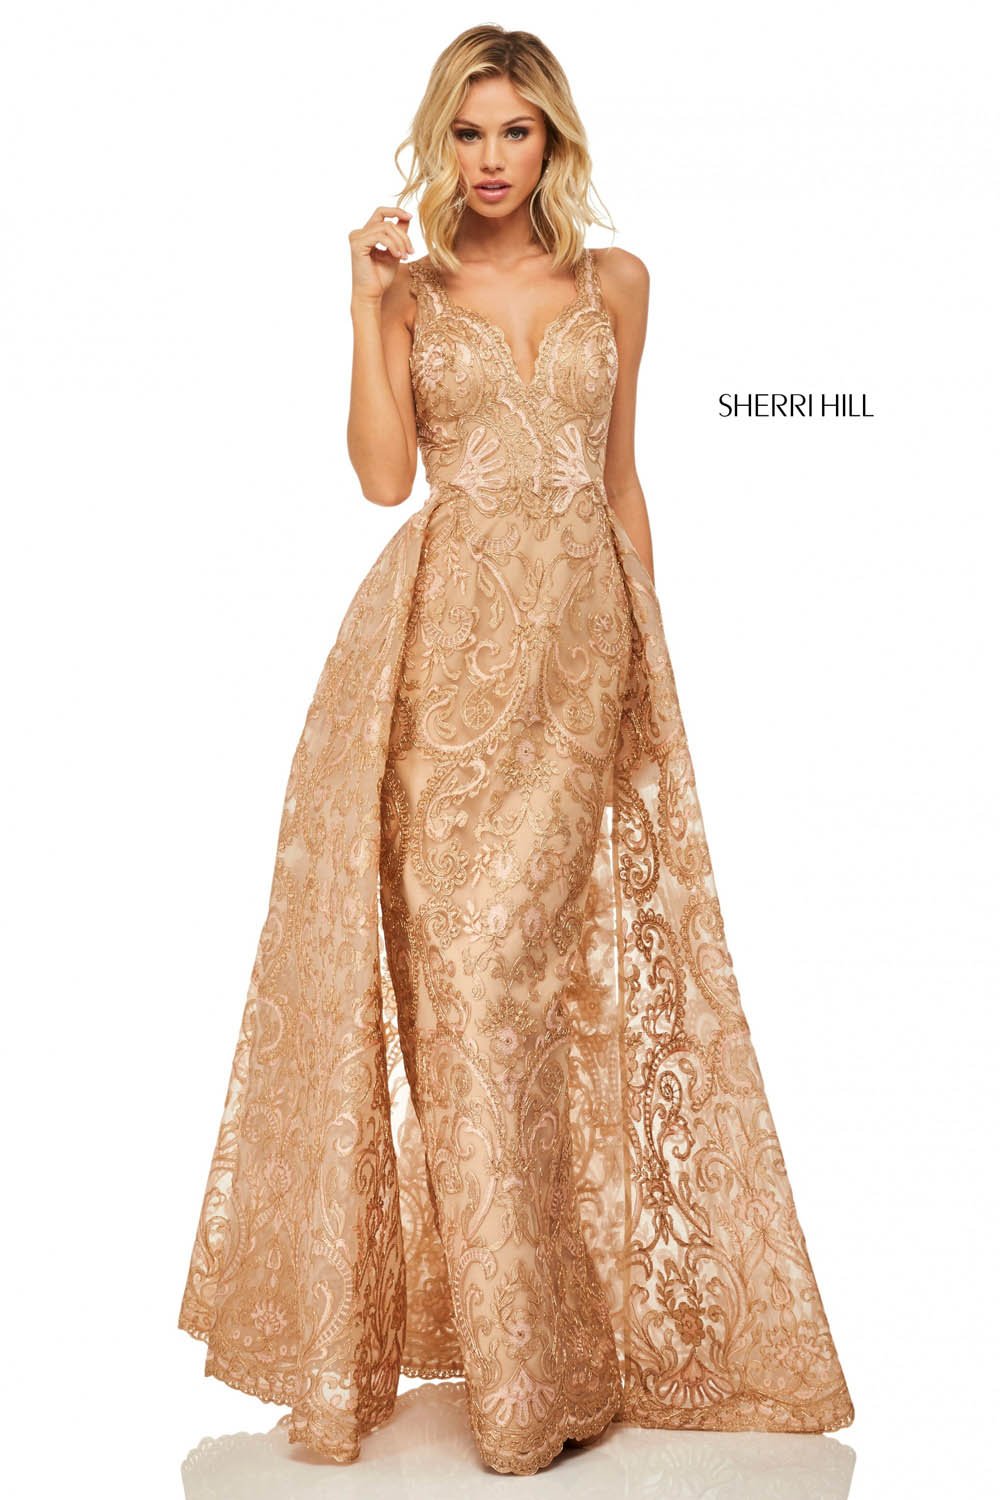 Sherri Hill 52878 dress images in these colors: Rose Gold, Gold.